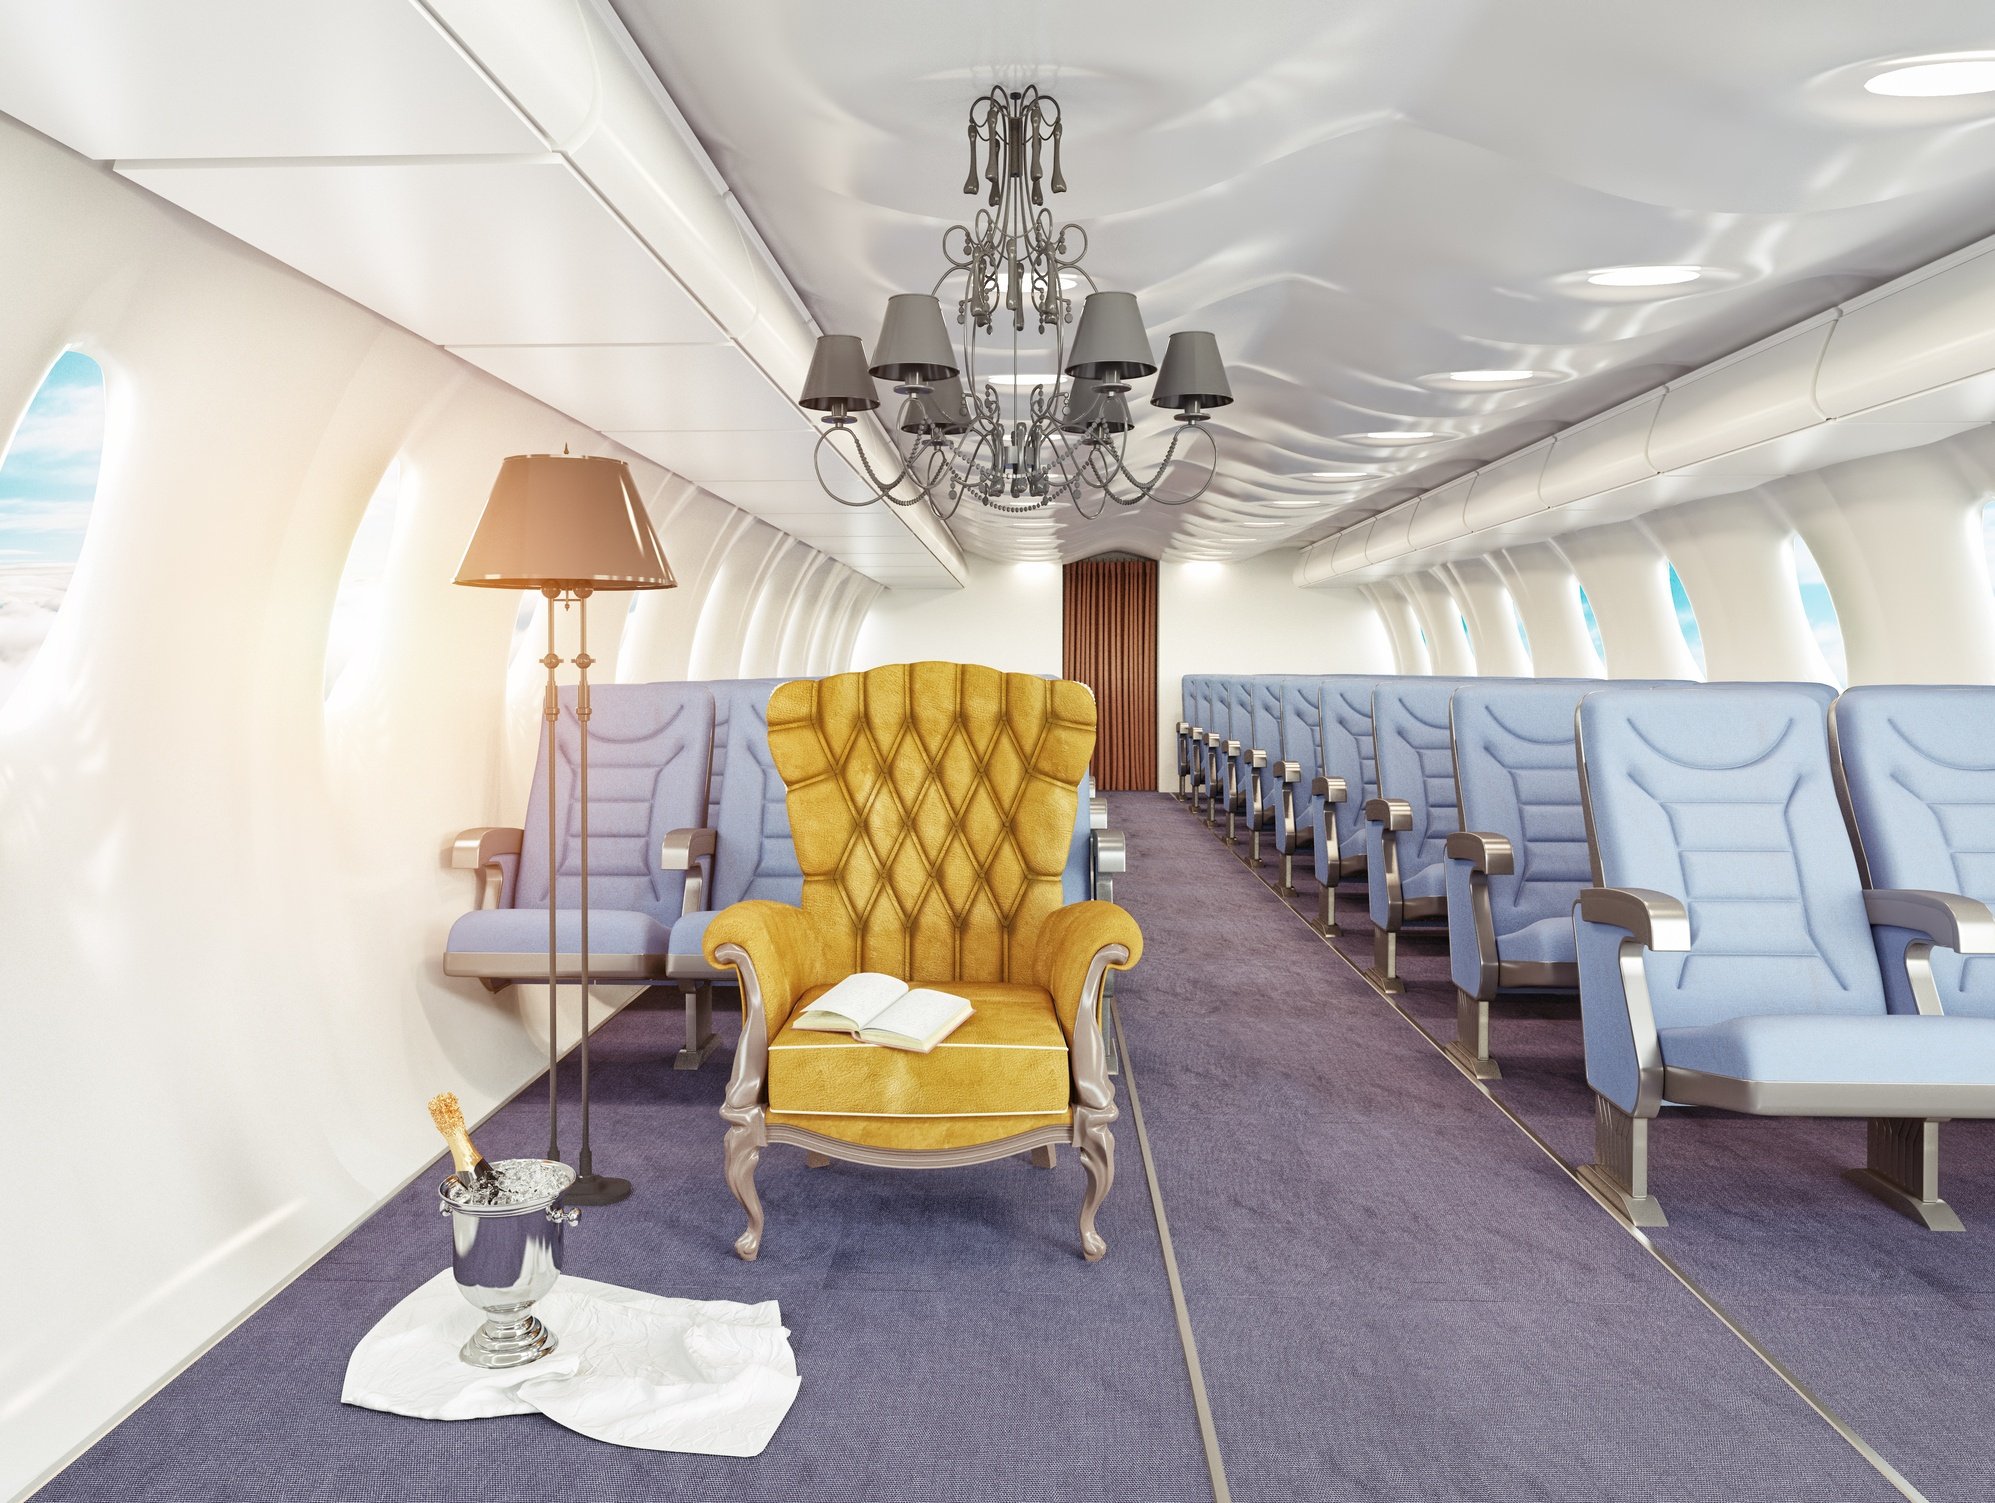 luxury armchair in row of airplane